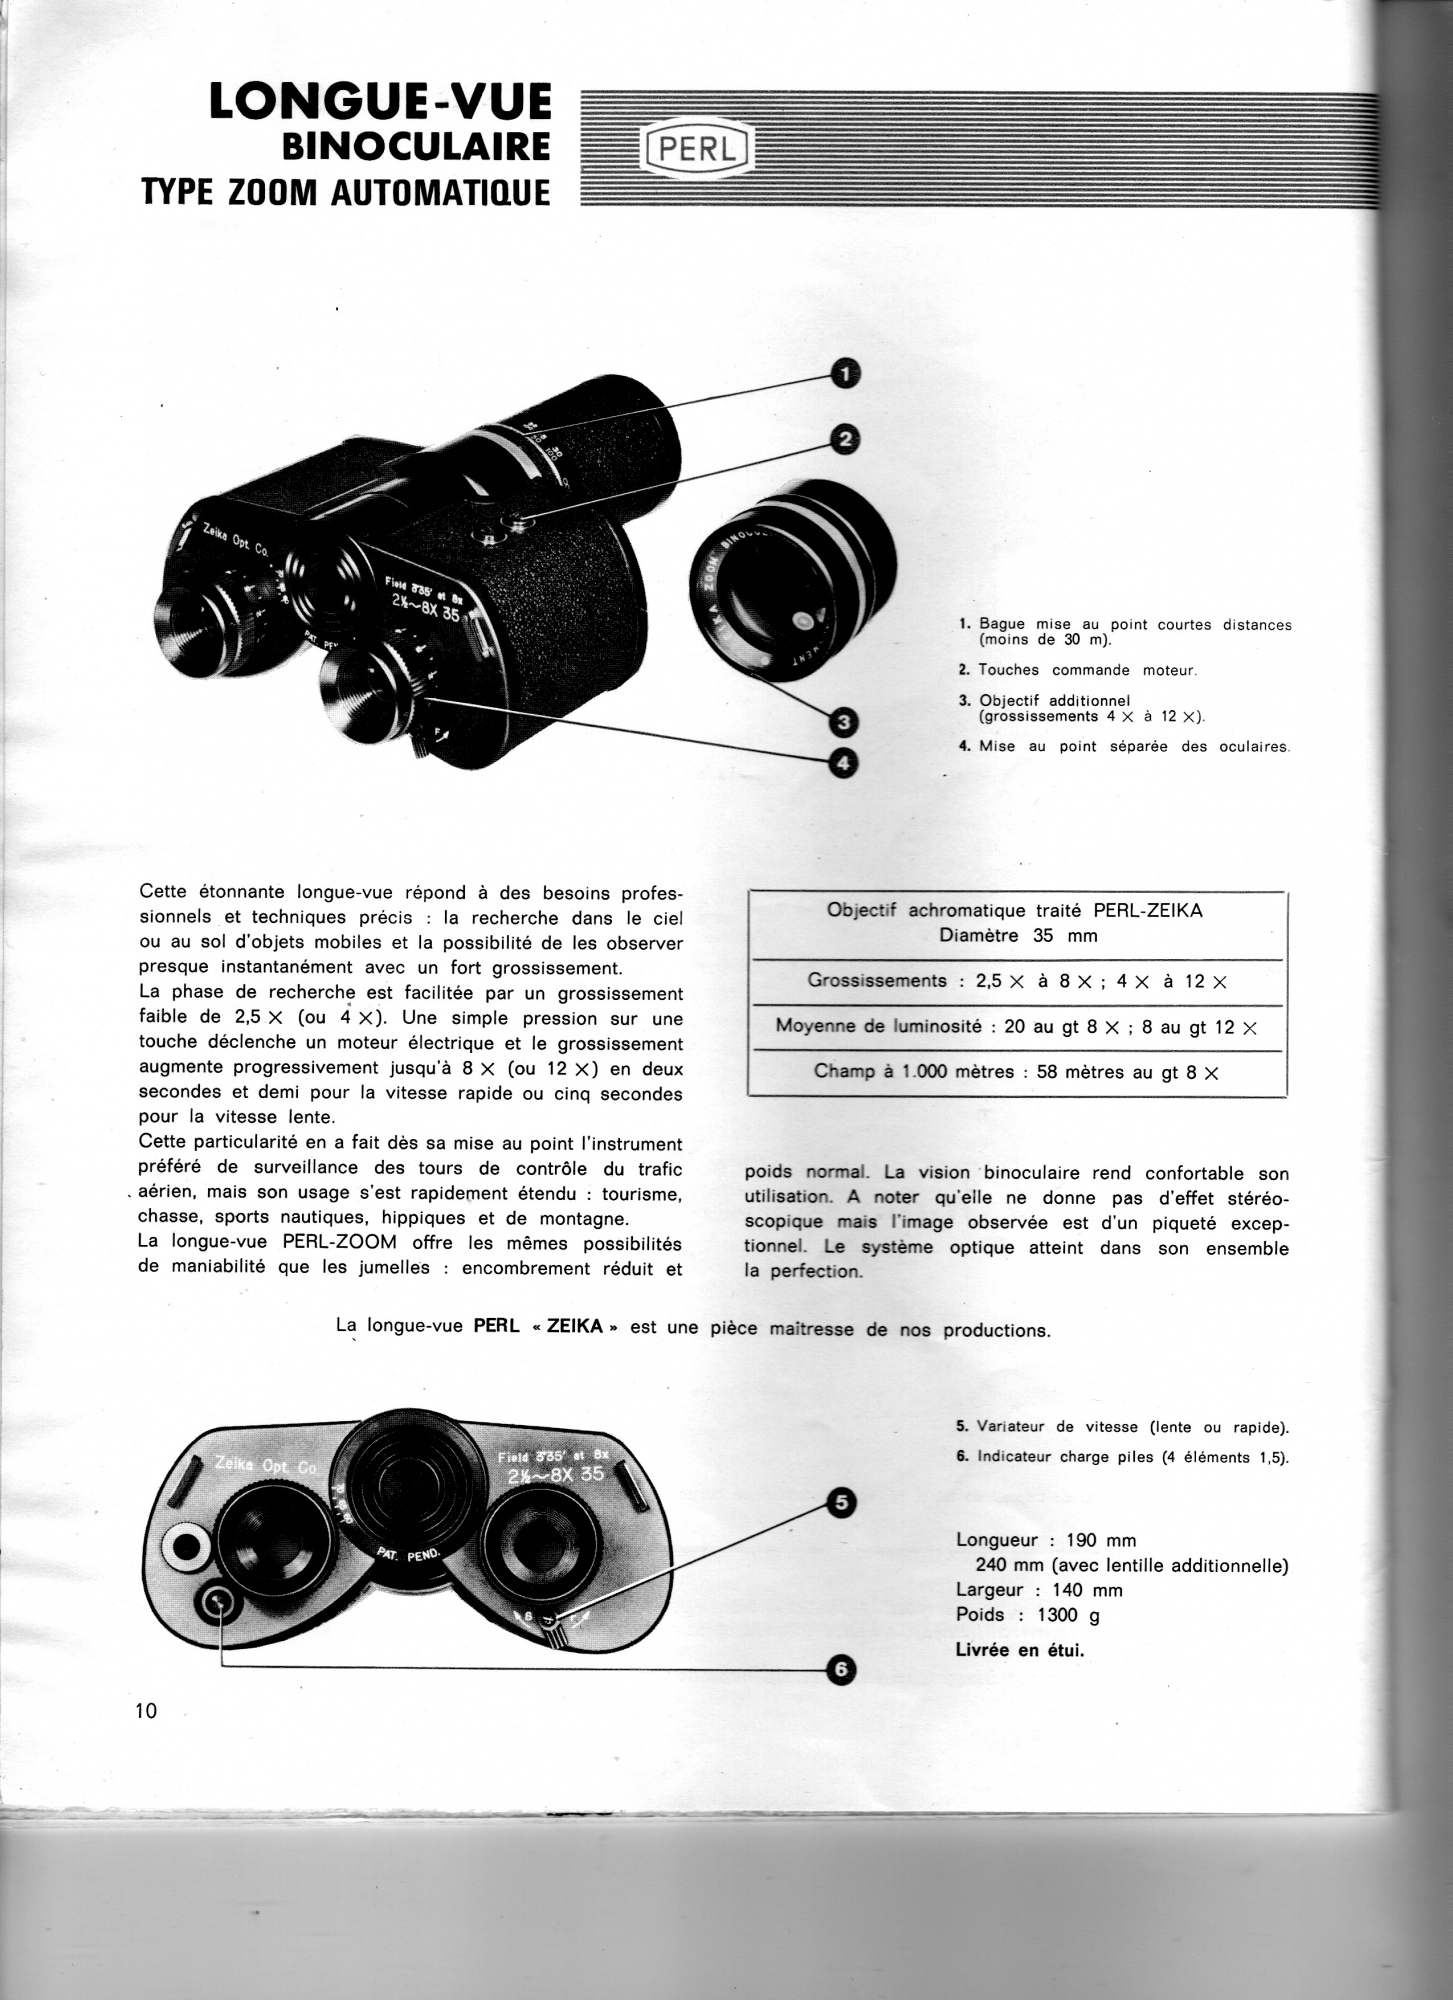 Catalogue Perl 1969 page 10.jpg